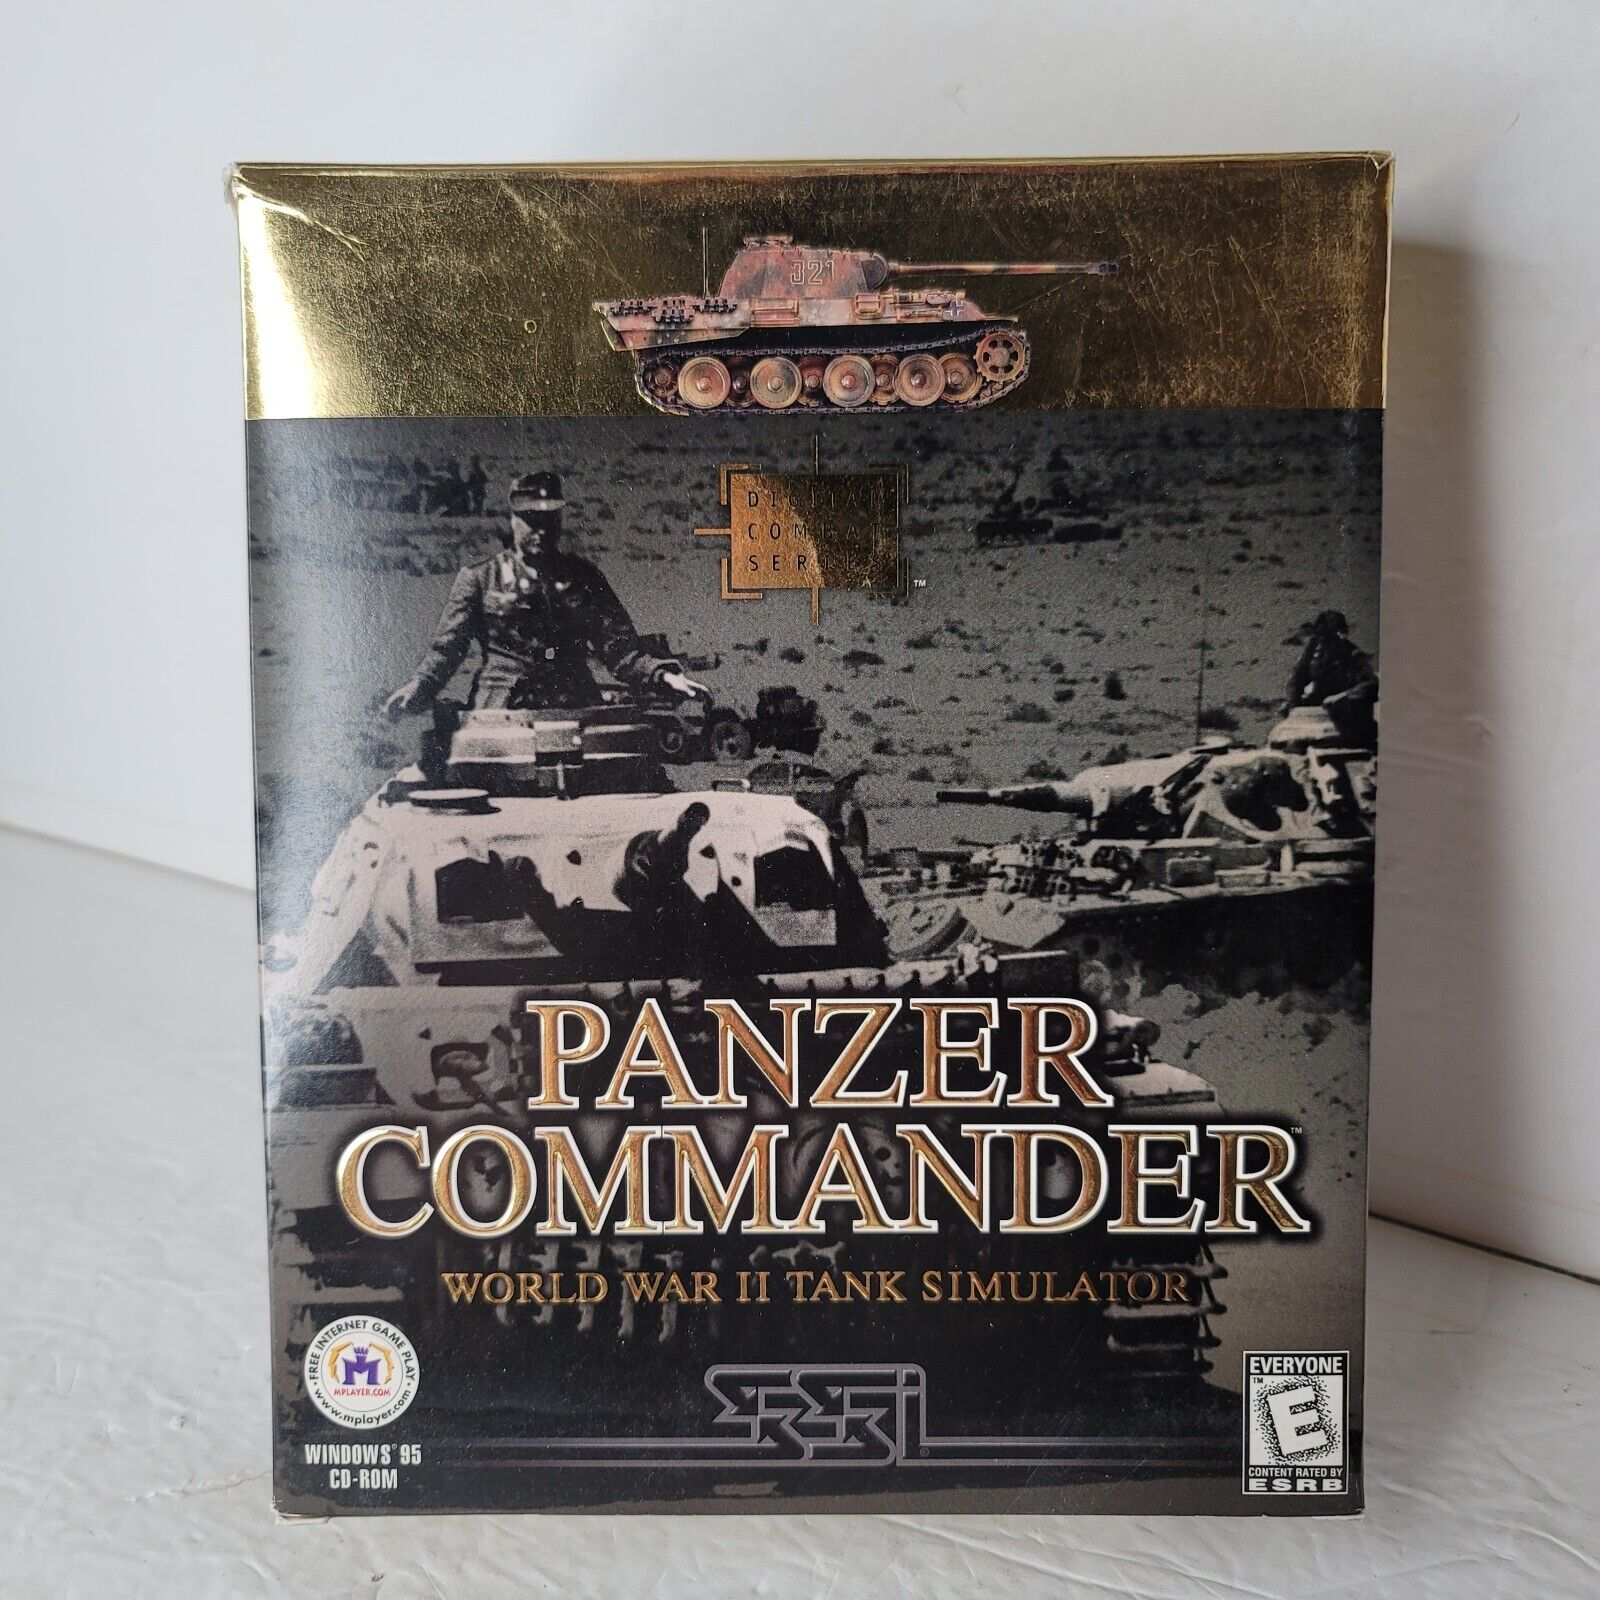 Panzer Commander WWII Tank Simulator PC CD-ROM w Outer Box Manual Reference Card